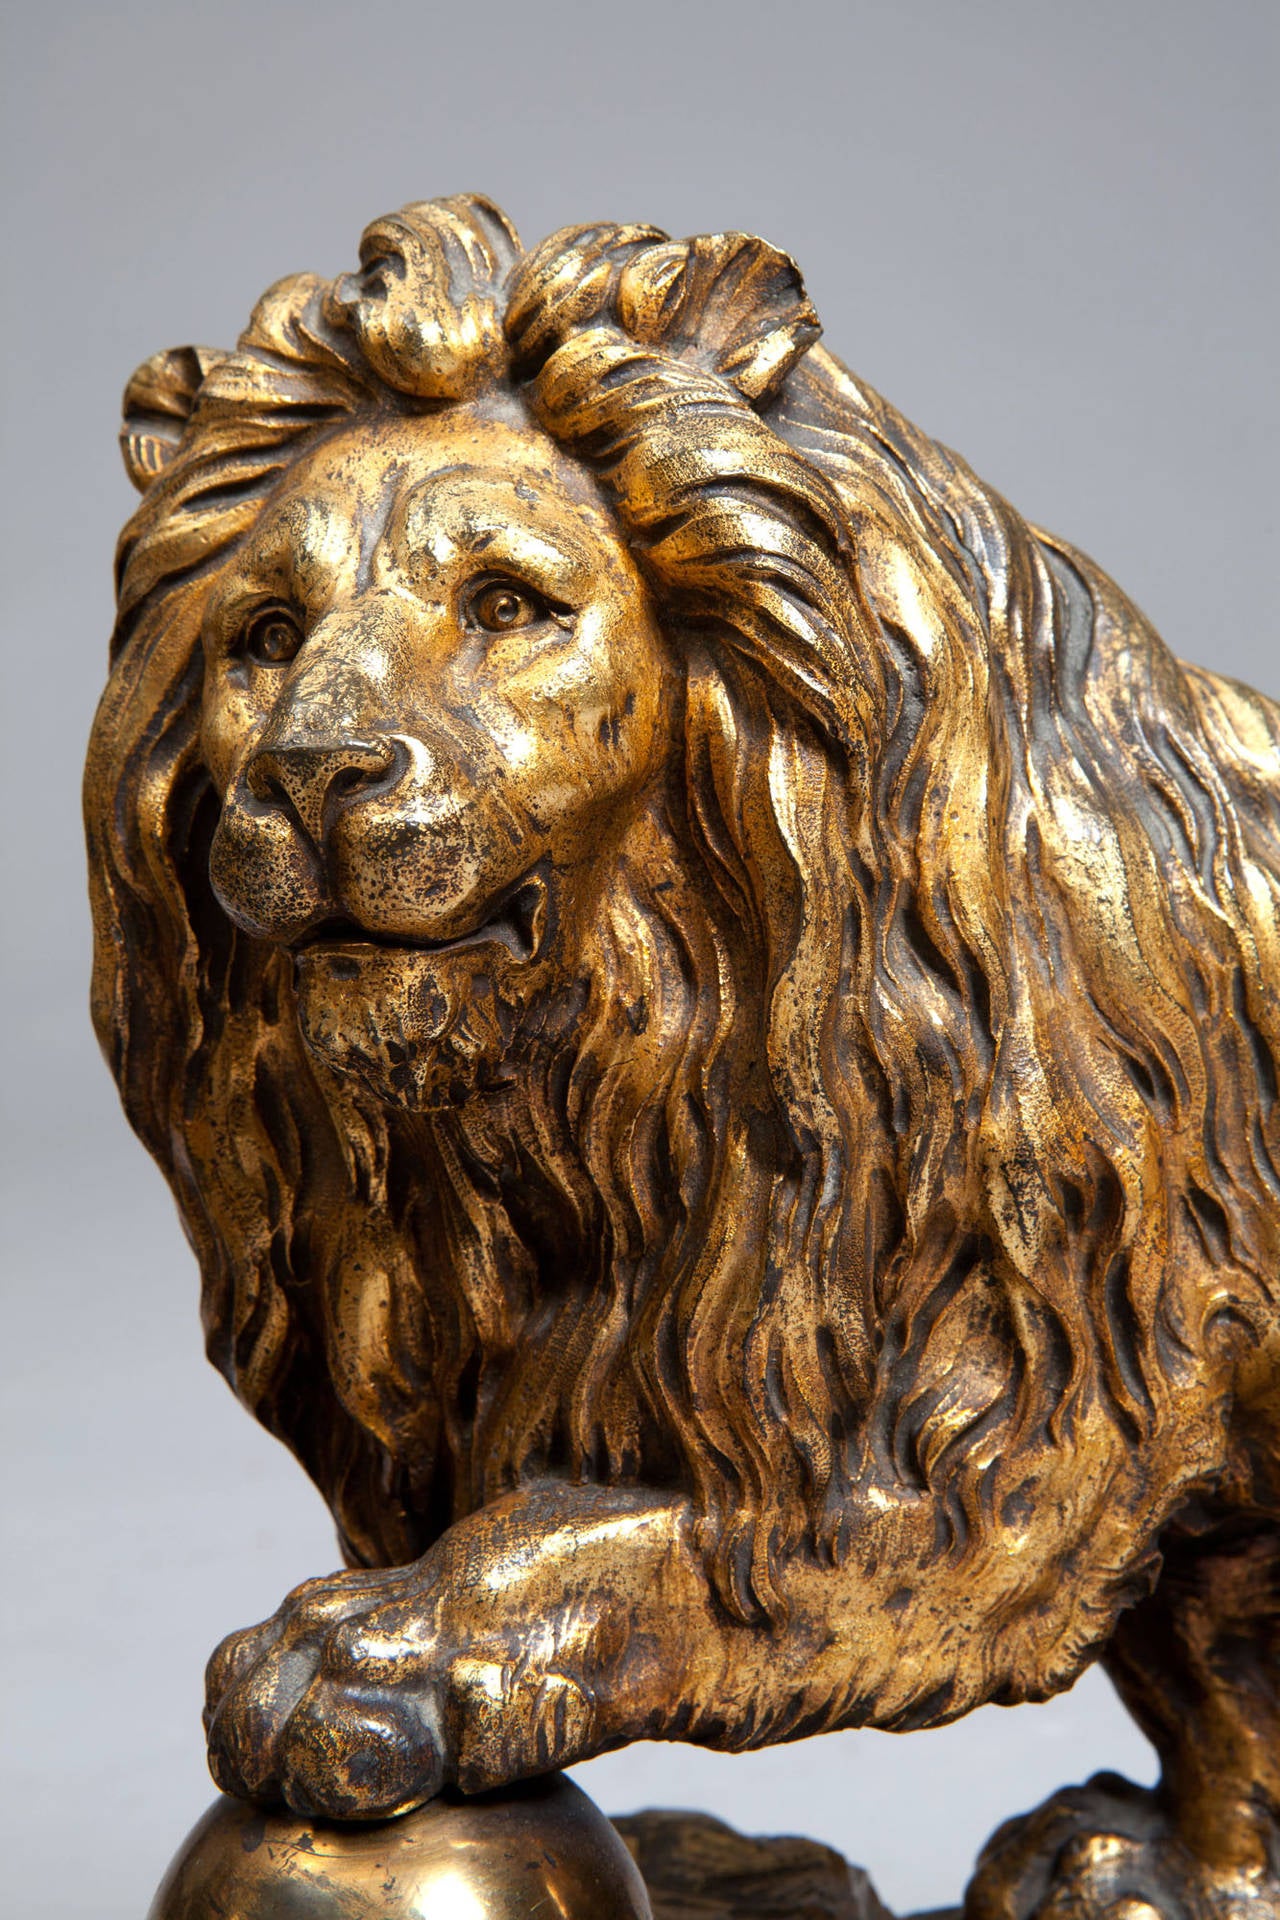 A magnificent pair of large-scale cast bronze and gilt Medici lions, each with one paw raised on a ball. 

Cast in bronze and gilt, their heads turned somewhat to the side and shown with commanding expression, one forepaw resting on a sphere, also